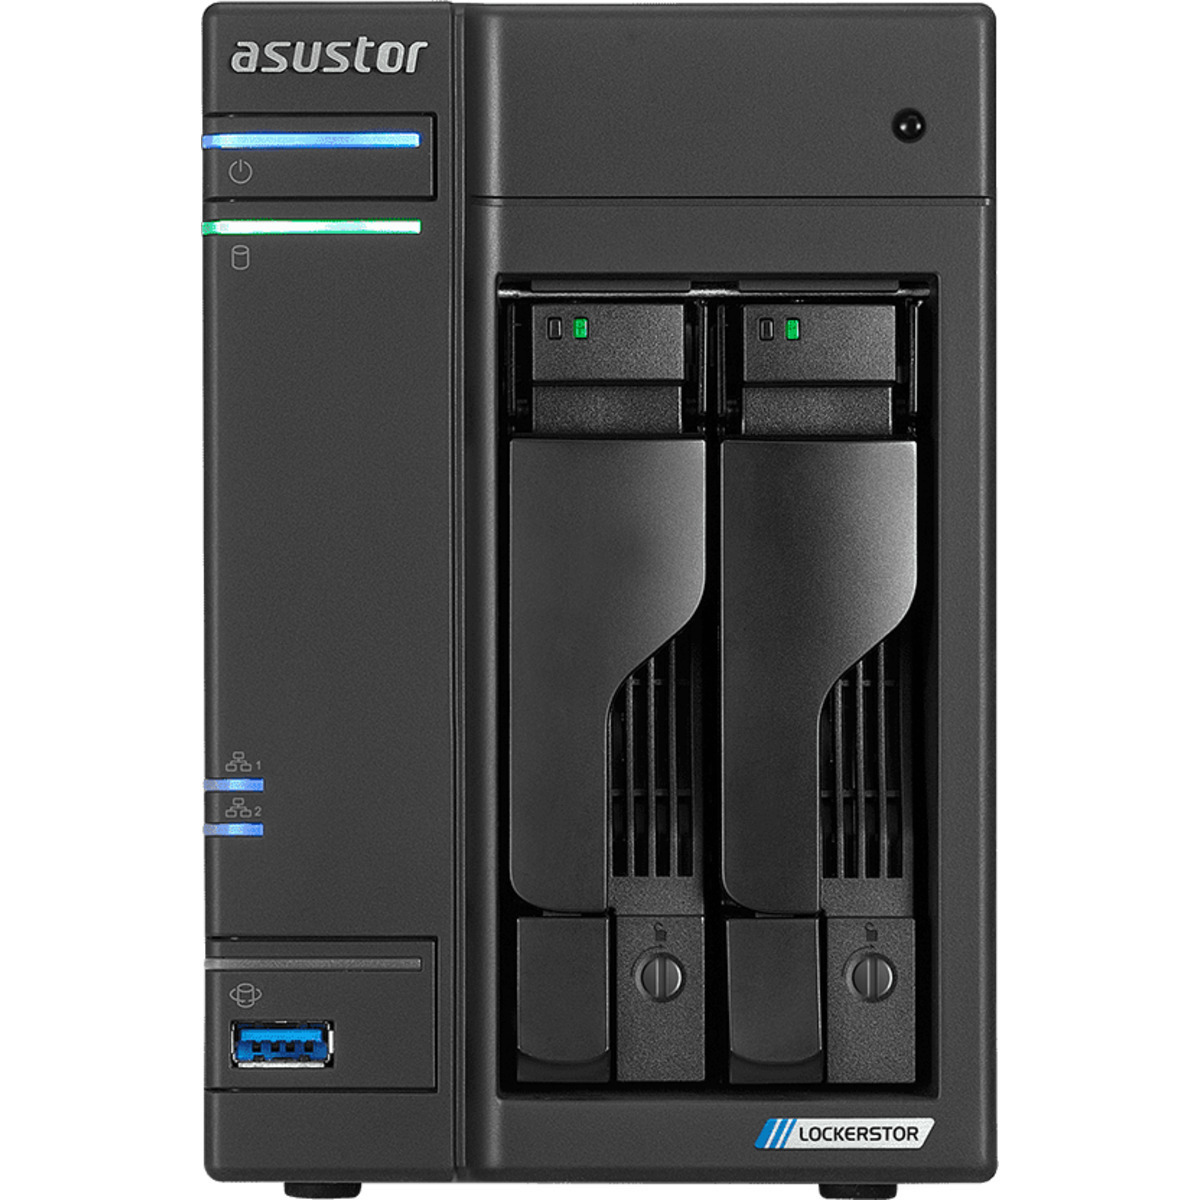 ASUSTOR AS6602T Lockerstor 2 12tb 2-Bay Desktop Multimedia / Power User / Business NAS - Network Attached Storage Device 1x12tb Western Digital Ultrastar DC HC520 HUH721212ALE600 3.5 7200rpm SATA 6Gb/s HDD ENTERPRISE Class Drives Installed - Burn-In Tested - FREE RAM UPGRADE AS6602T Lockerstor 2